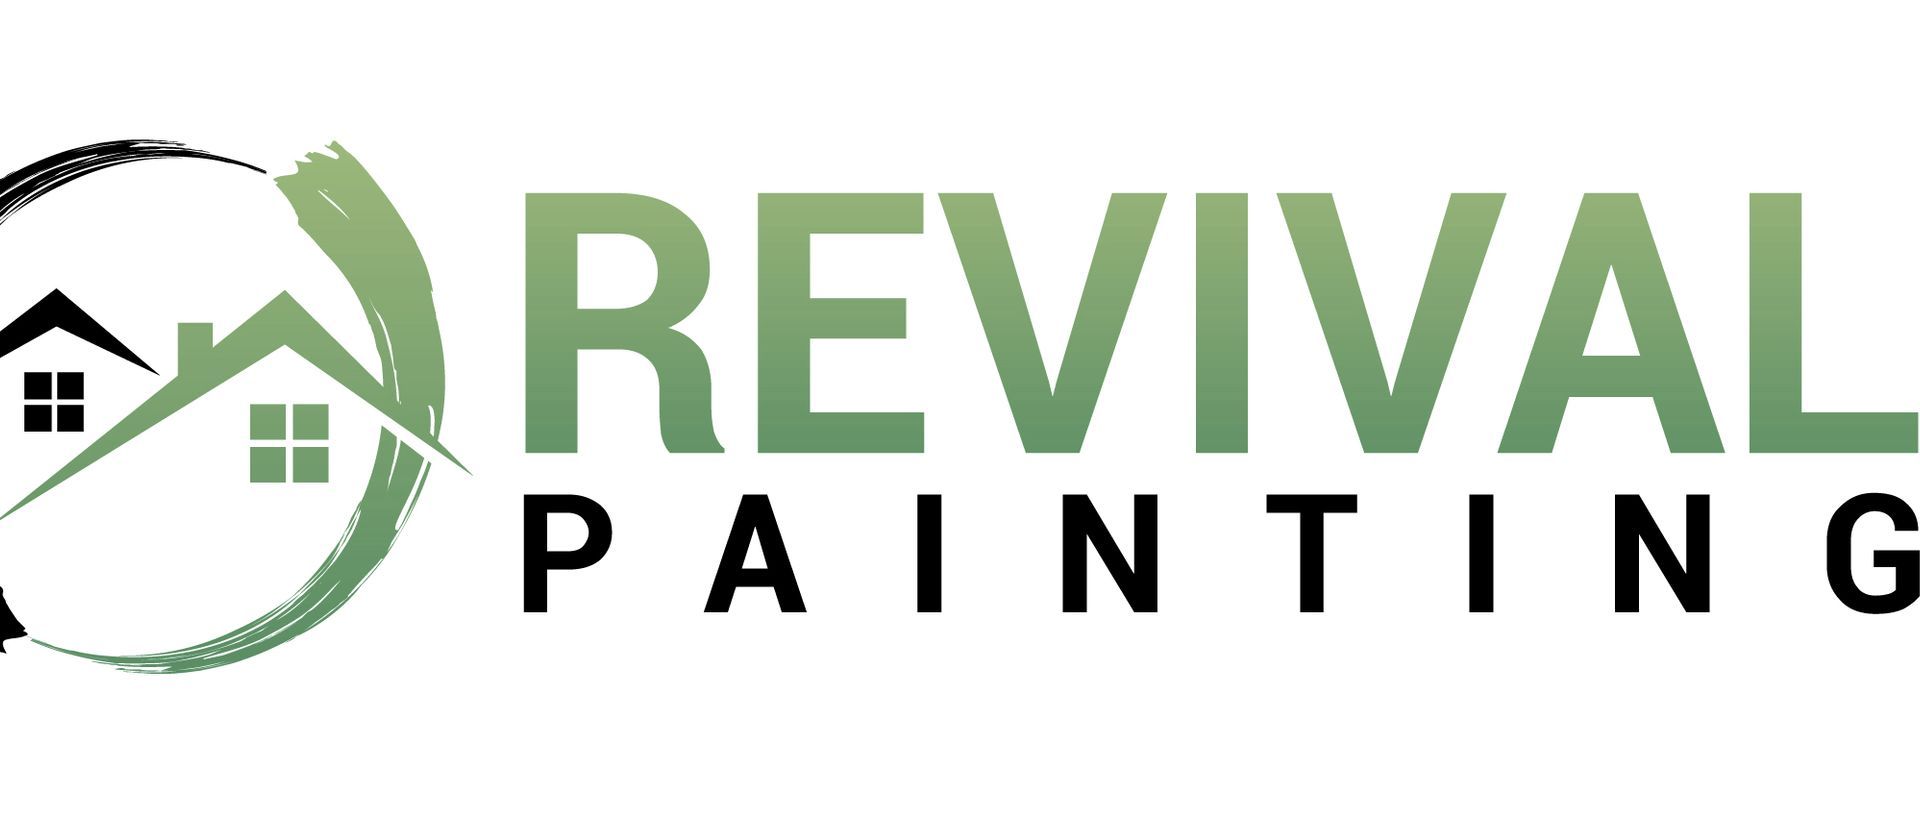 Revival Painting Banner image